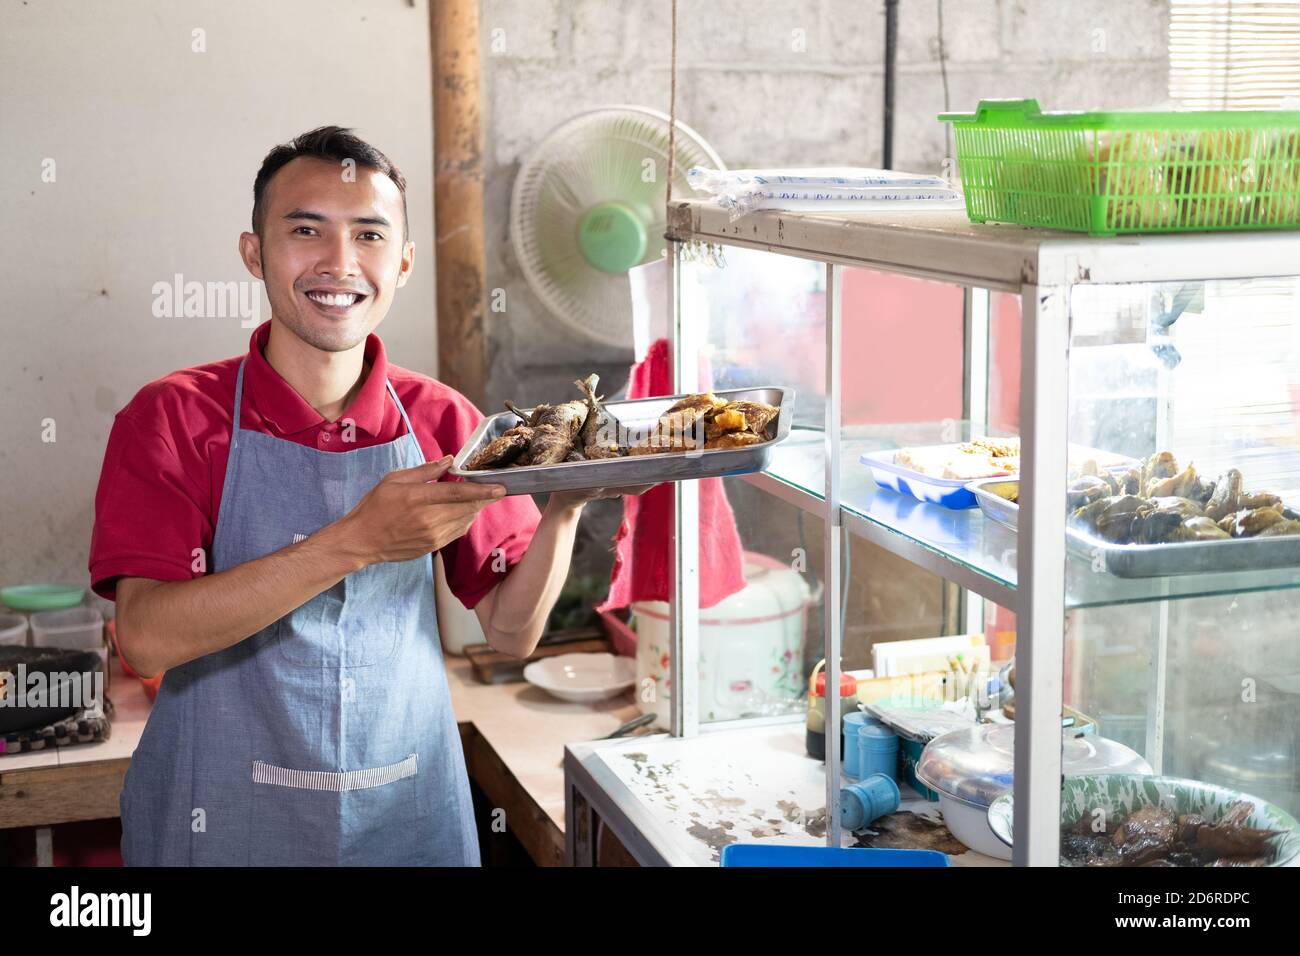 smiling male waiters carrying trays of side dishes near the display windows in food stalls Stock Photo